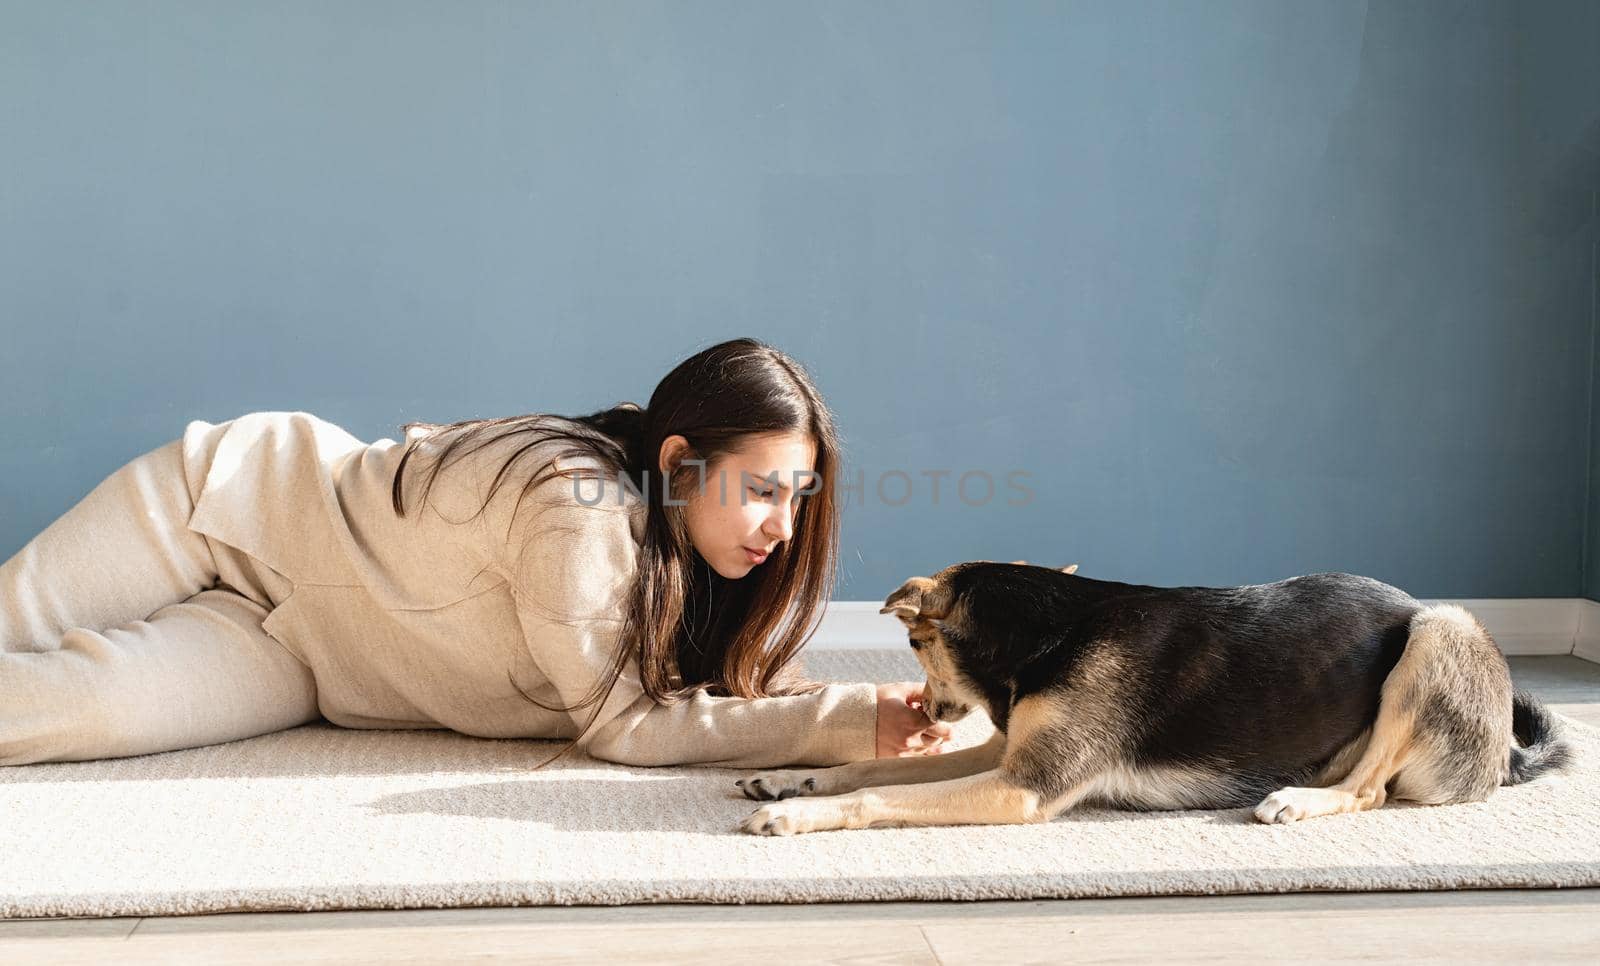 Beautiful woman with playful dog embracing at home by Desperada